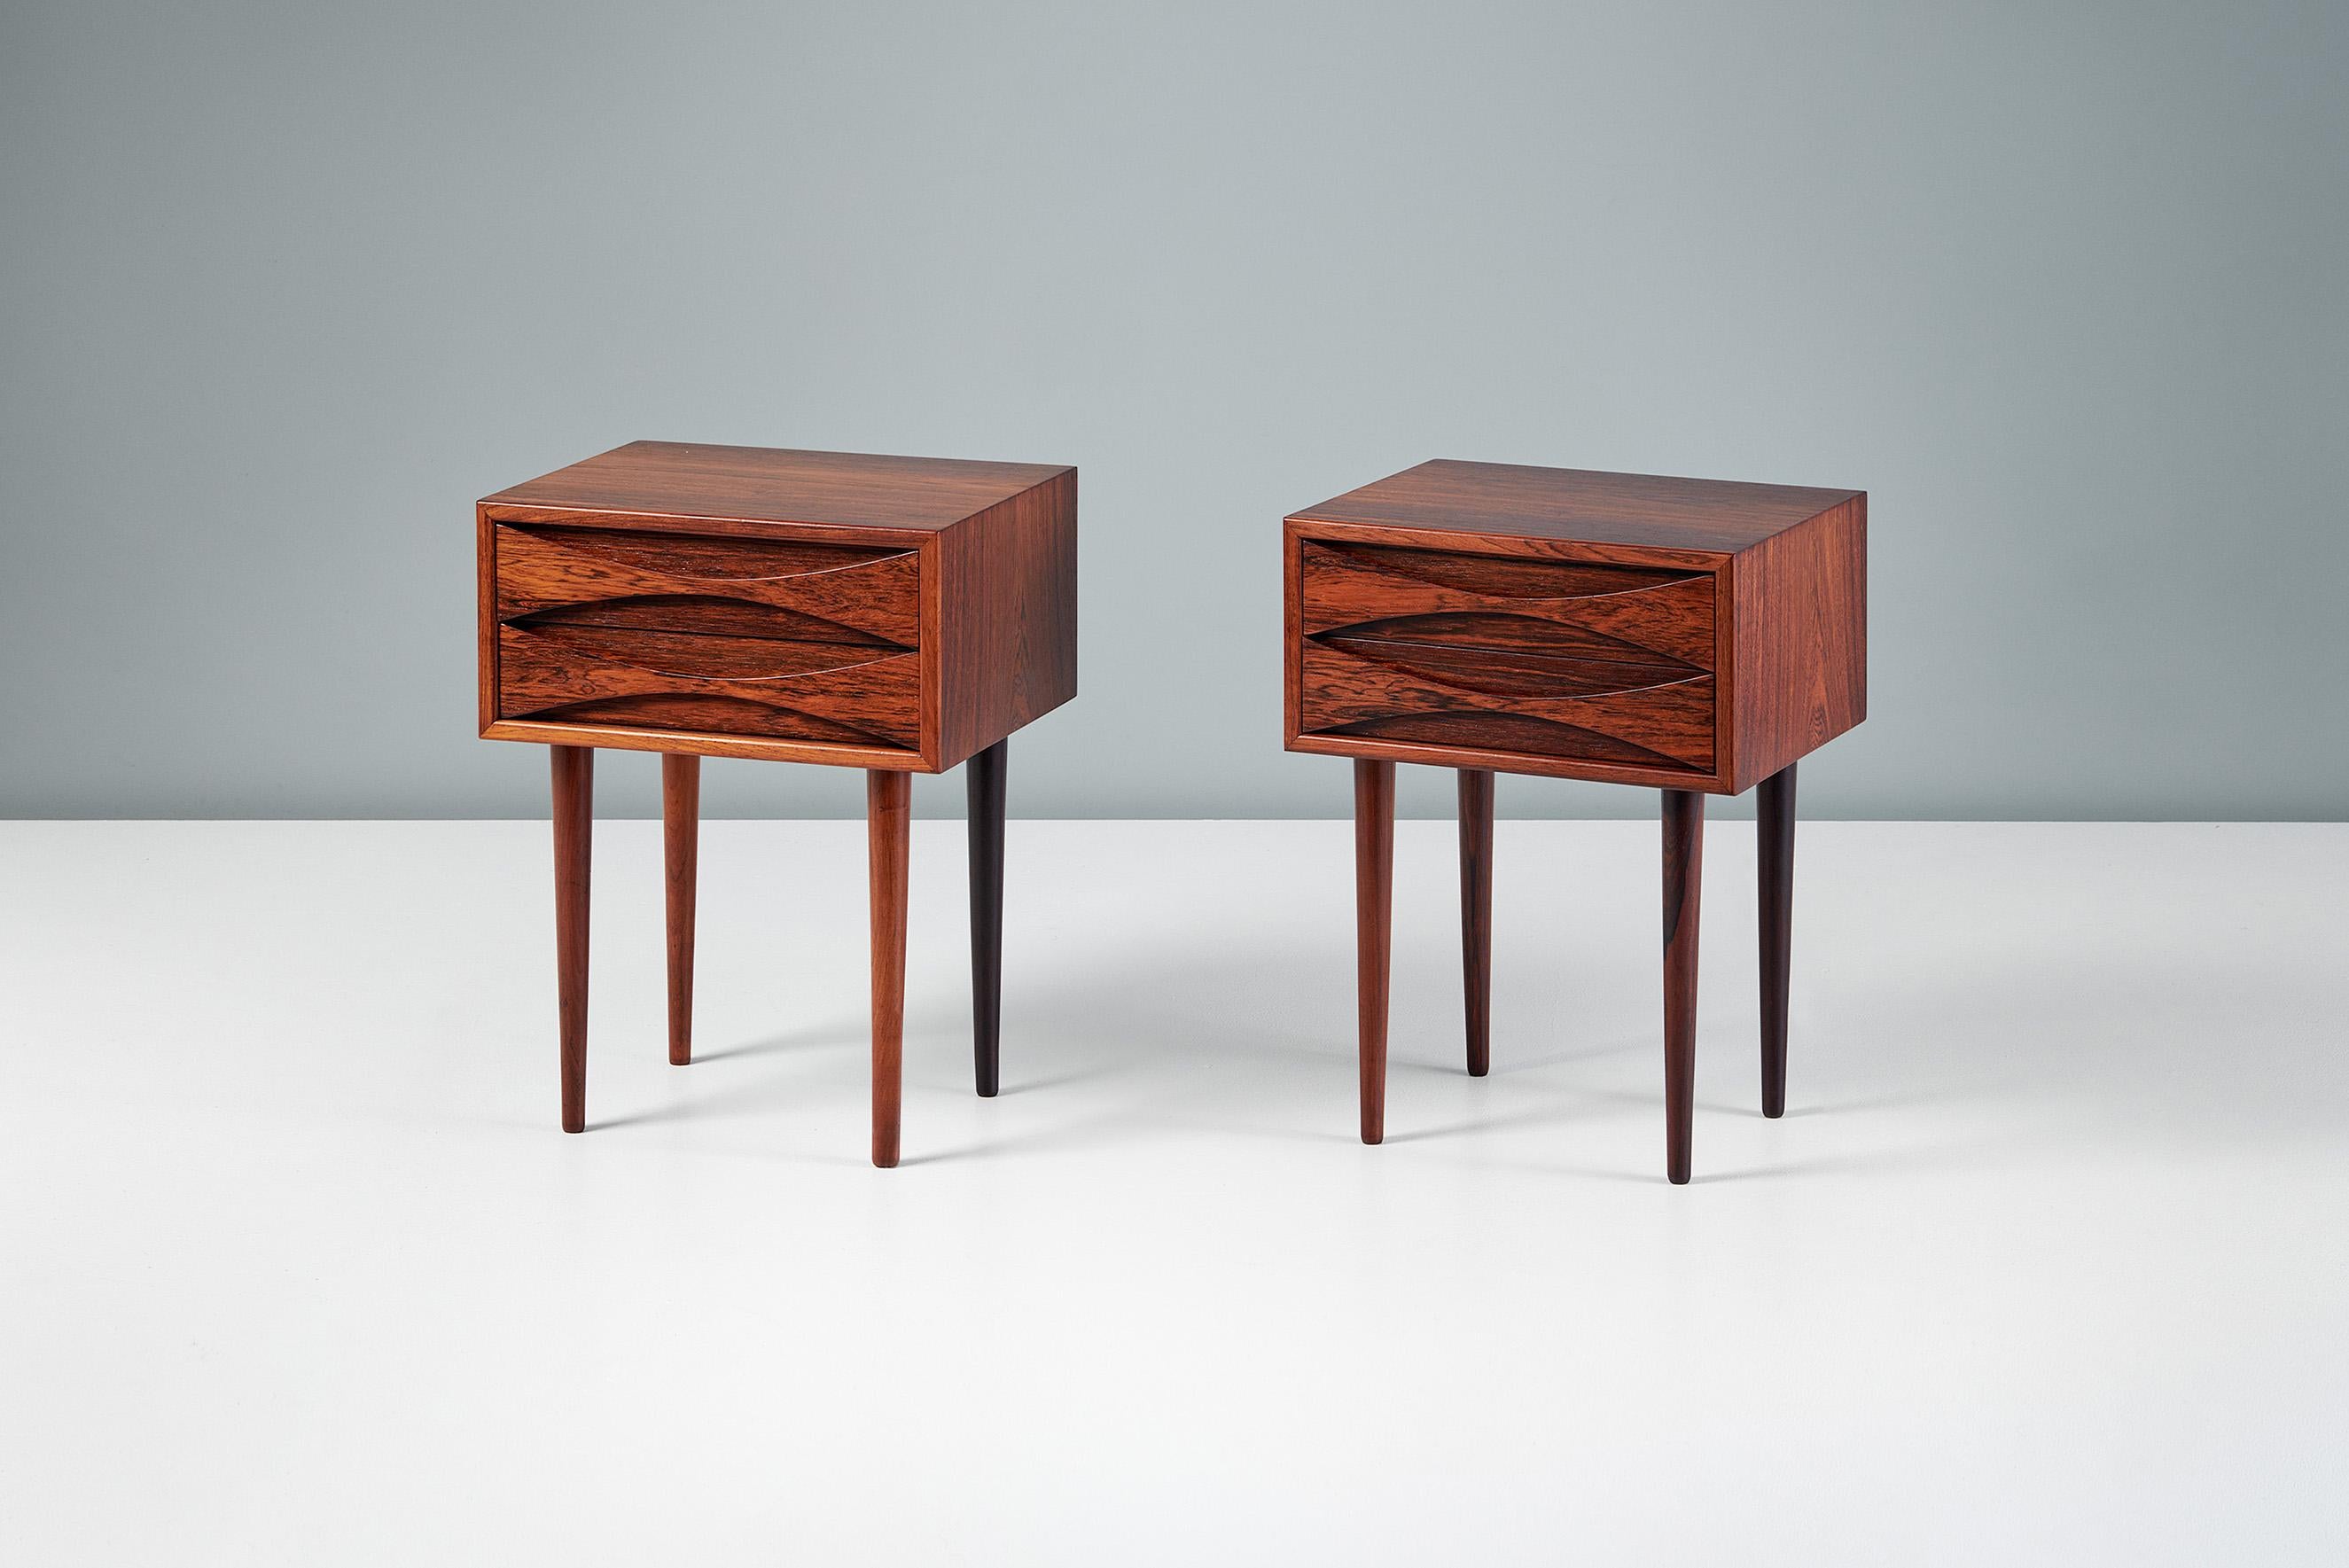 Rarely seen and highly collectible bedside cabinets from Niels Clausen for his own company NC Mobler. Each piece has solid turned rosewood legs with a cabinet built from oak and veneered with exquisite rosewood. The tops are book-matched across the